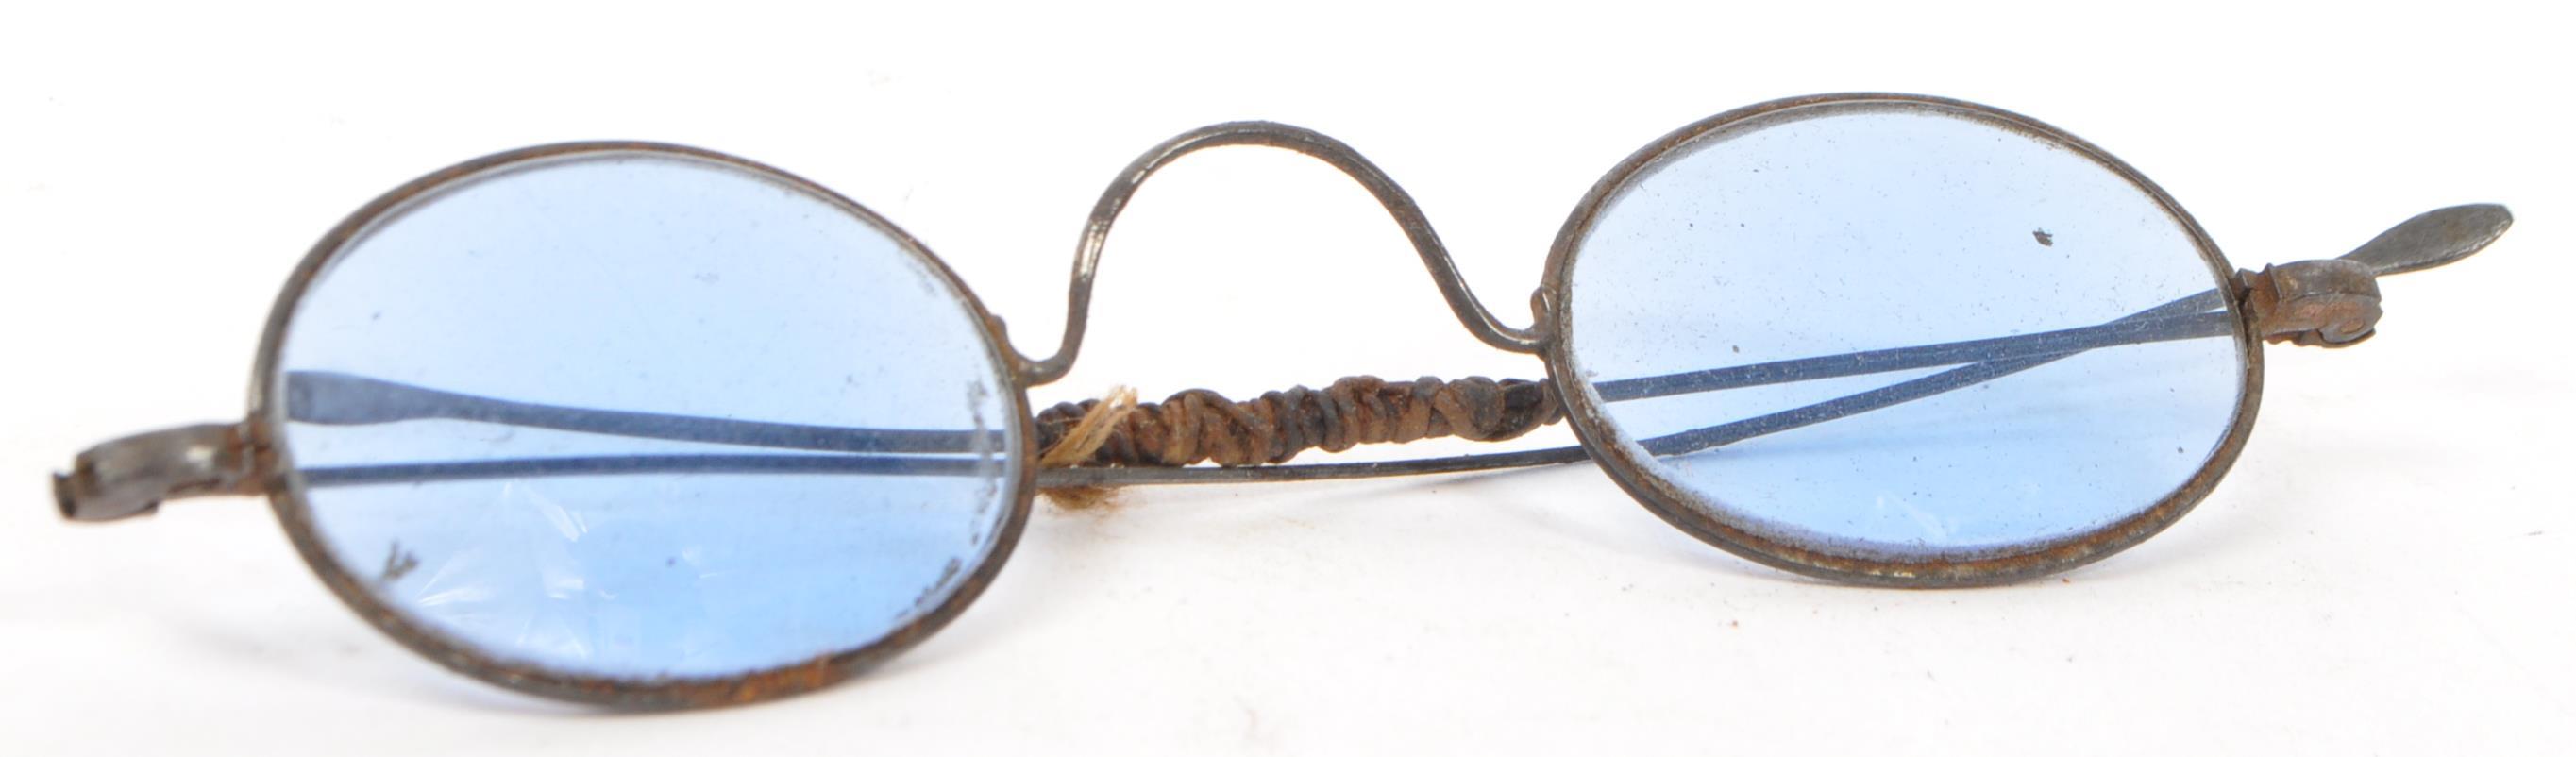 PAIR OF 19TH CENTURY BLUE LENS READING SPECTACLES - Image 2 of 5